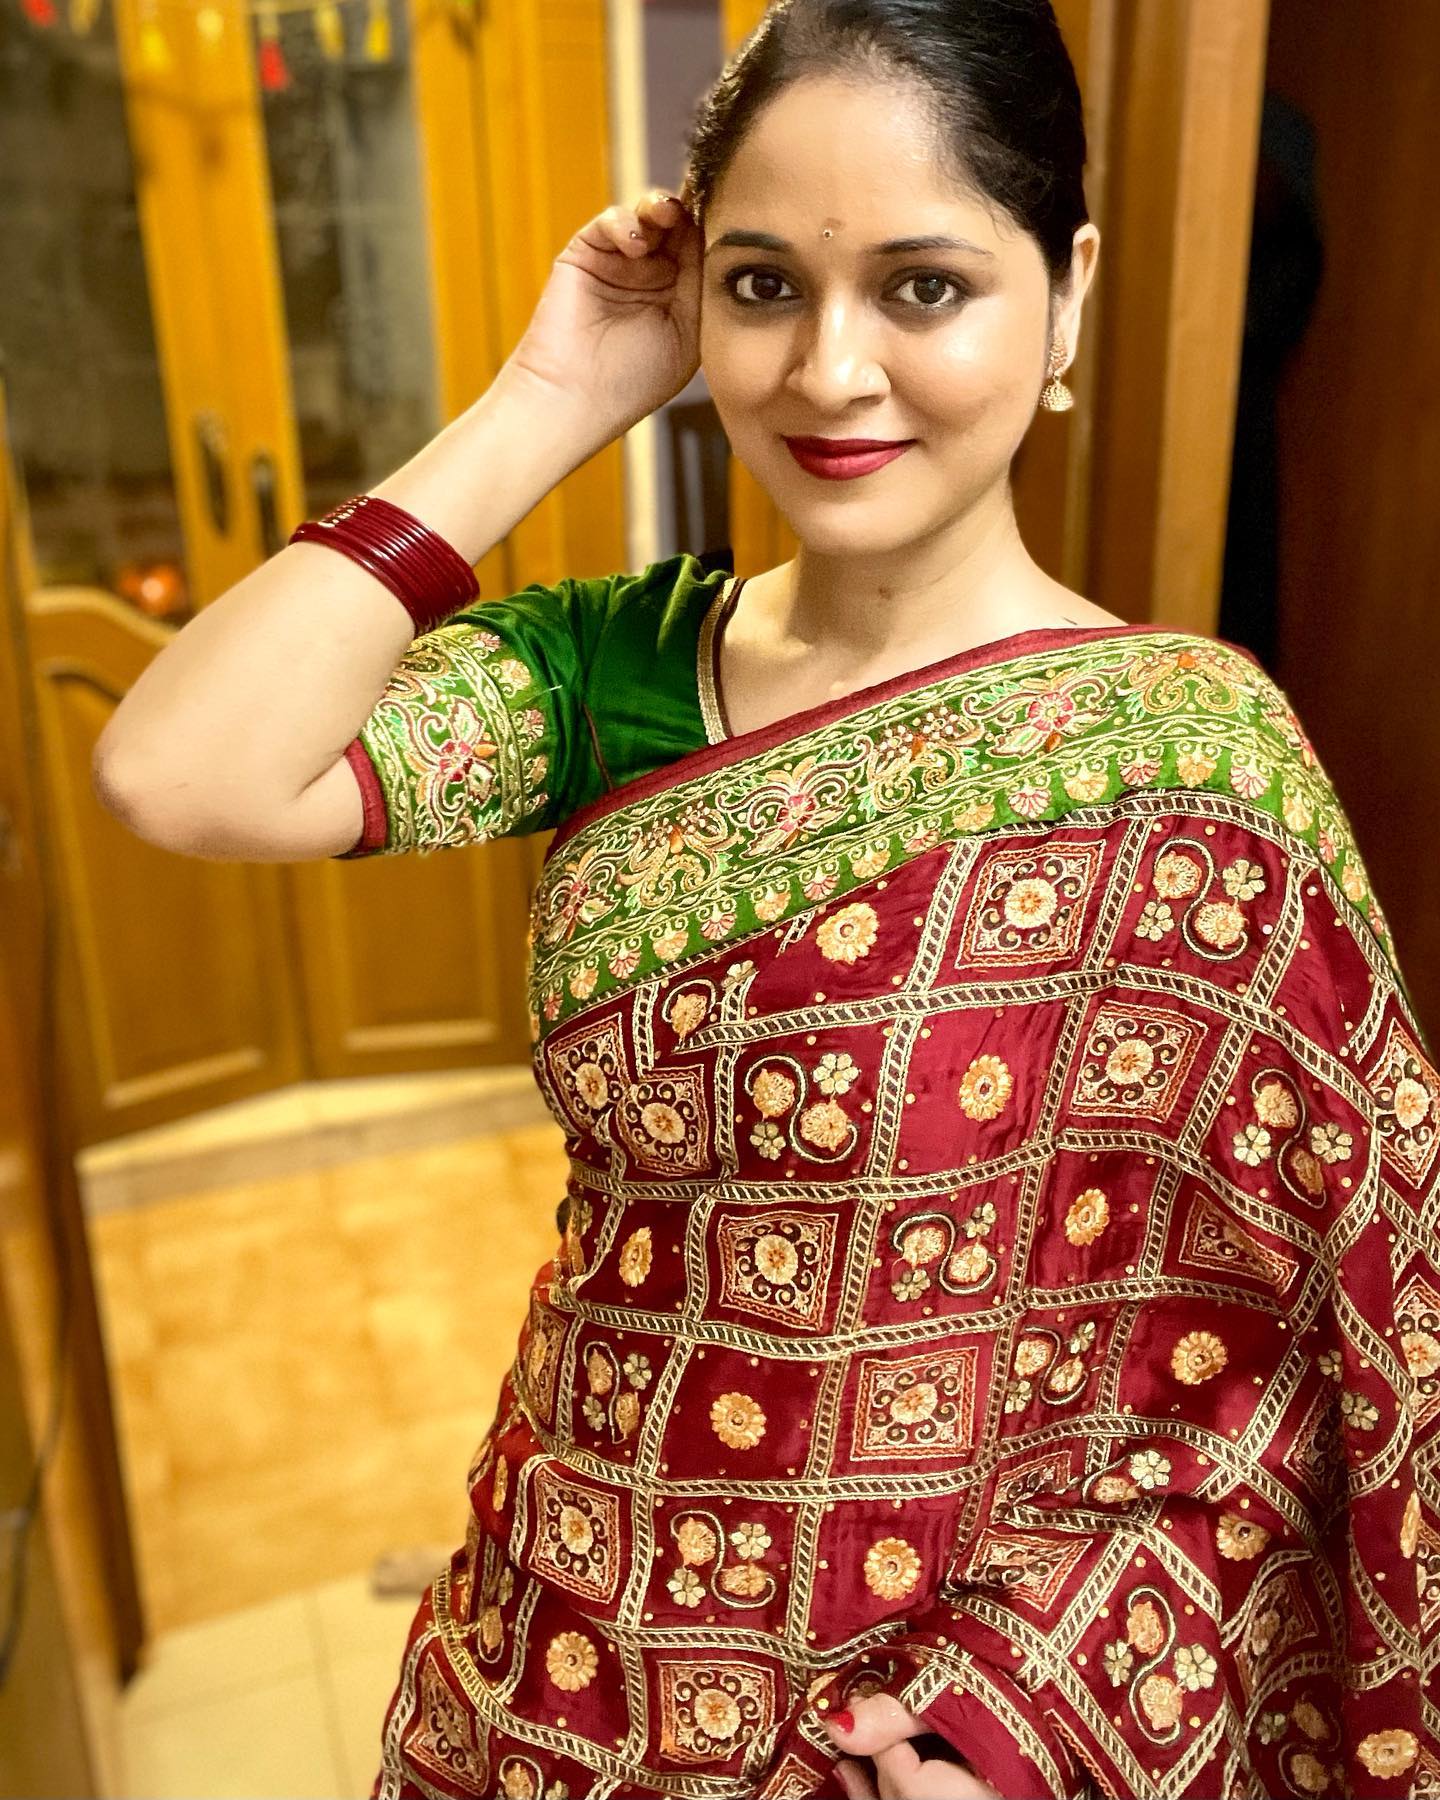 Gorgeous Parvathi Nirban In Red & Green Embroidered Saree Gives Us Festive Vibes Stylish Outfits & Looks